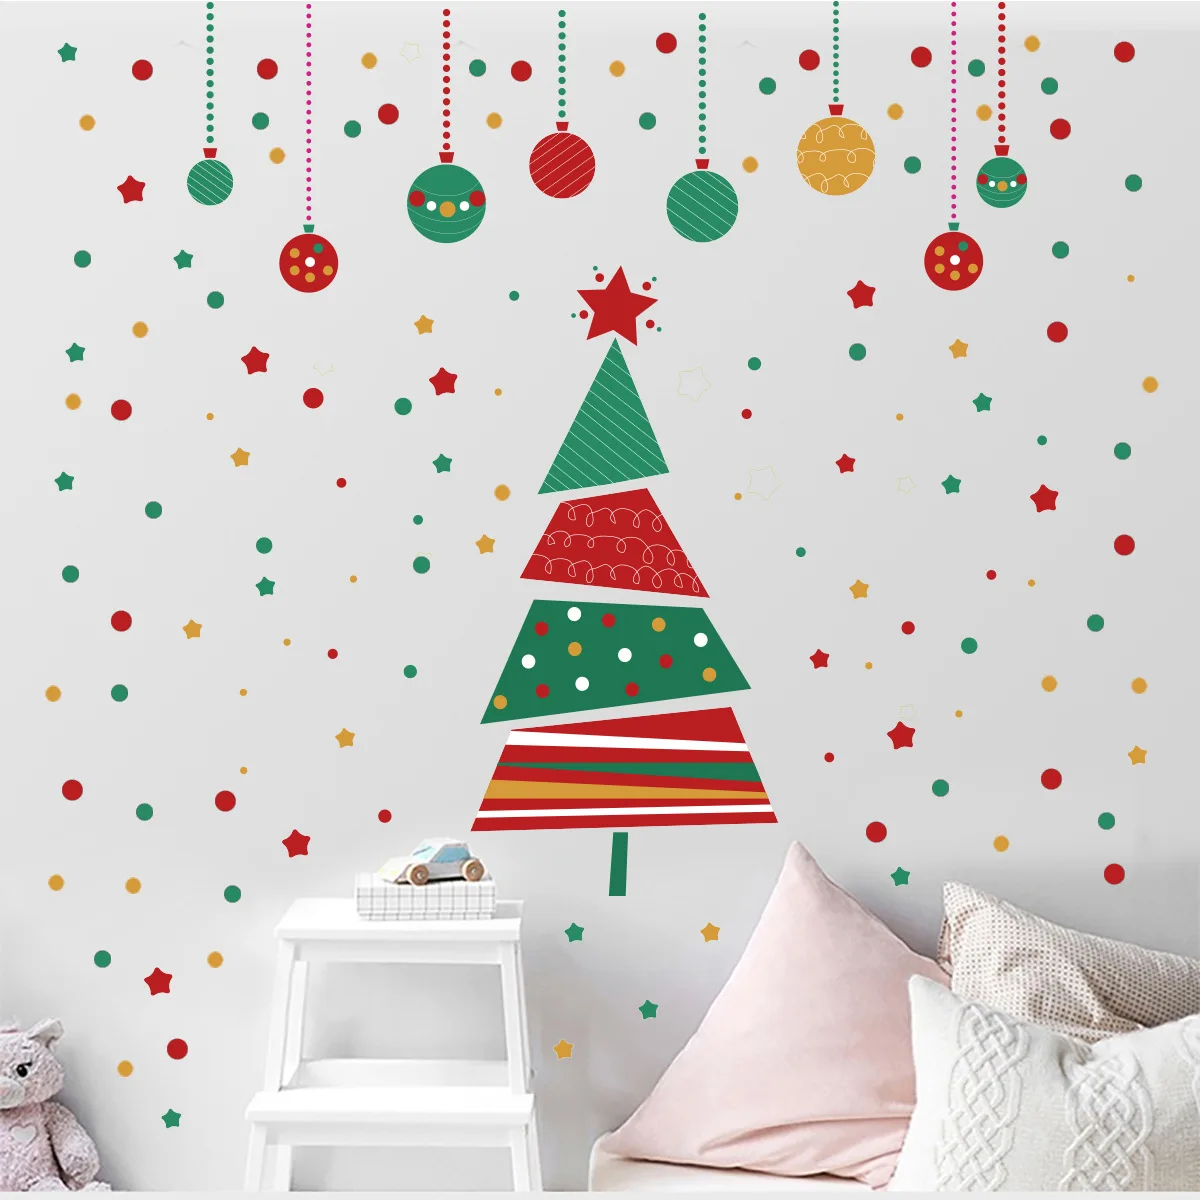 Christmas Decoration Xmas Tree Wall Stickers Interior Novelty Holiday Party Merry Hang Ornaments Decor Cute Room Wall Decals